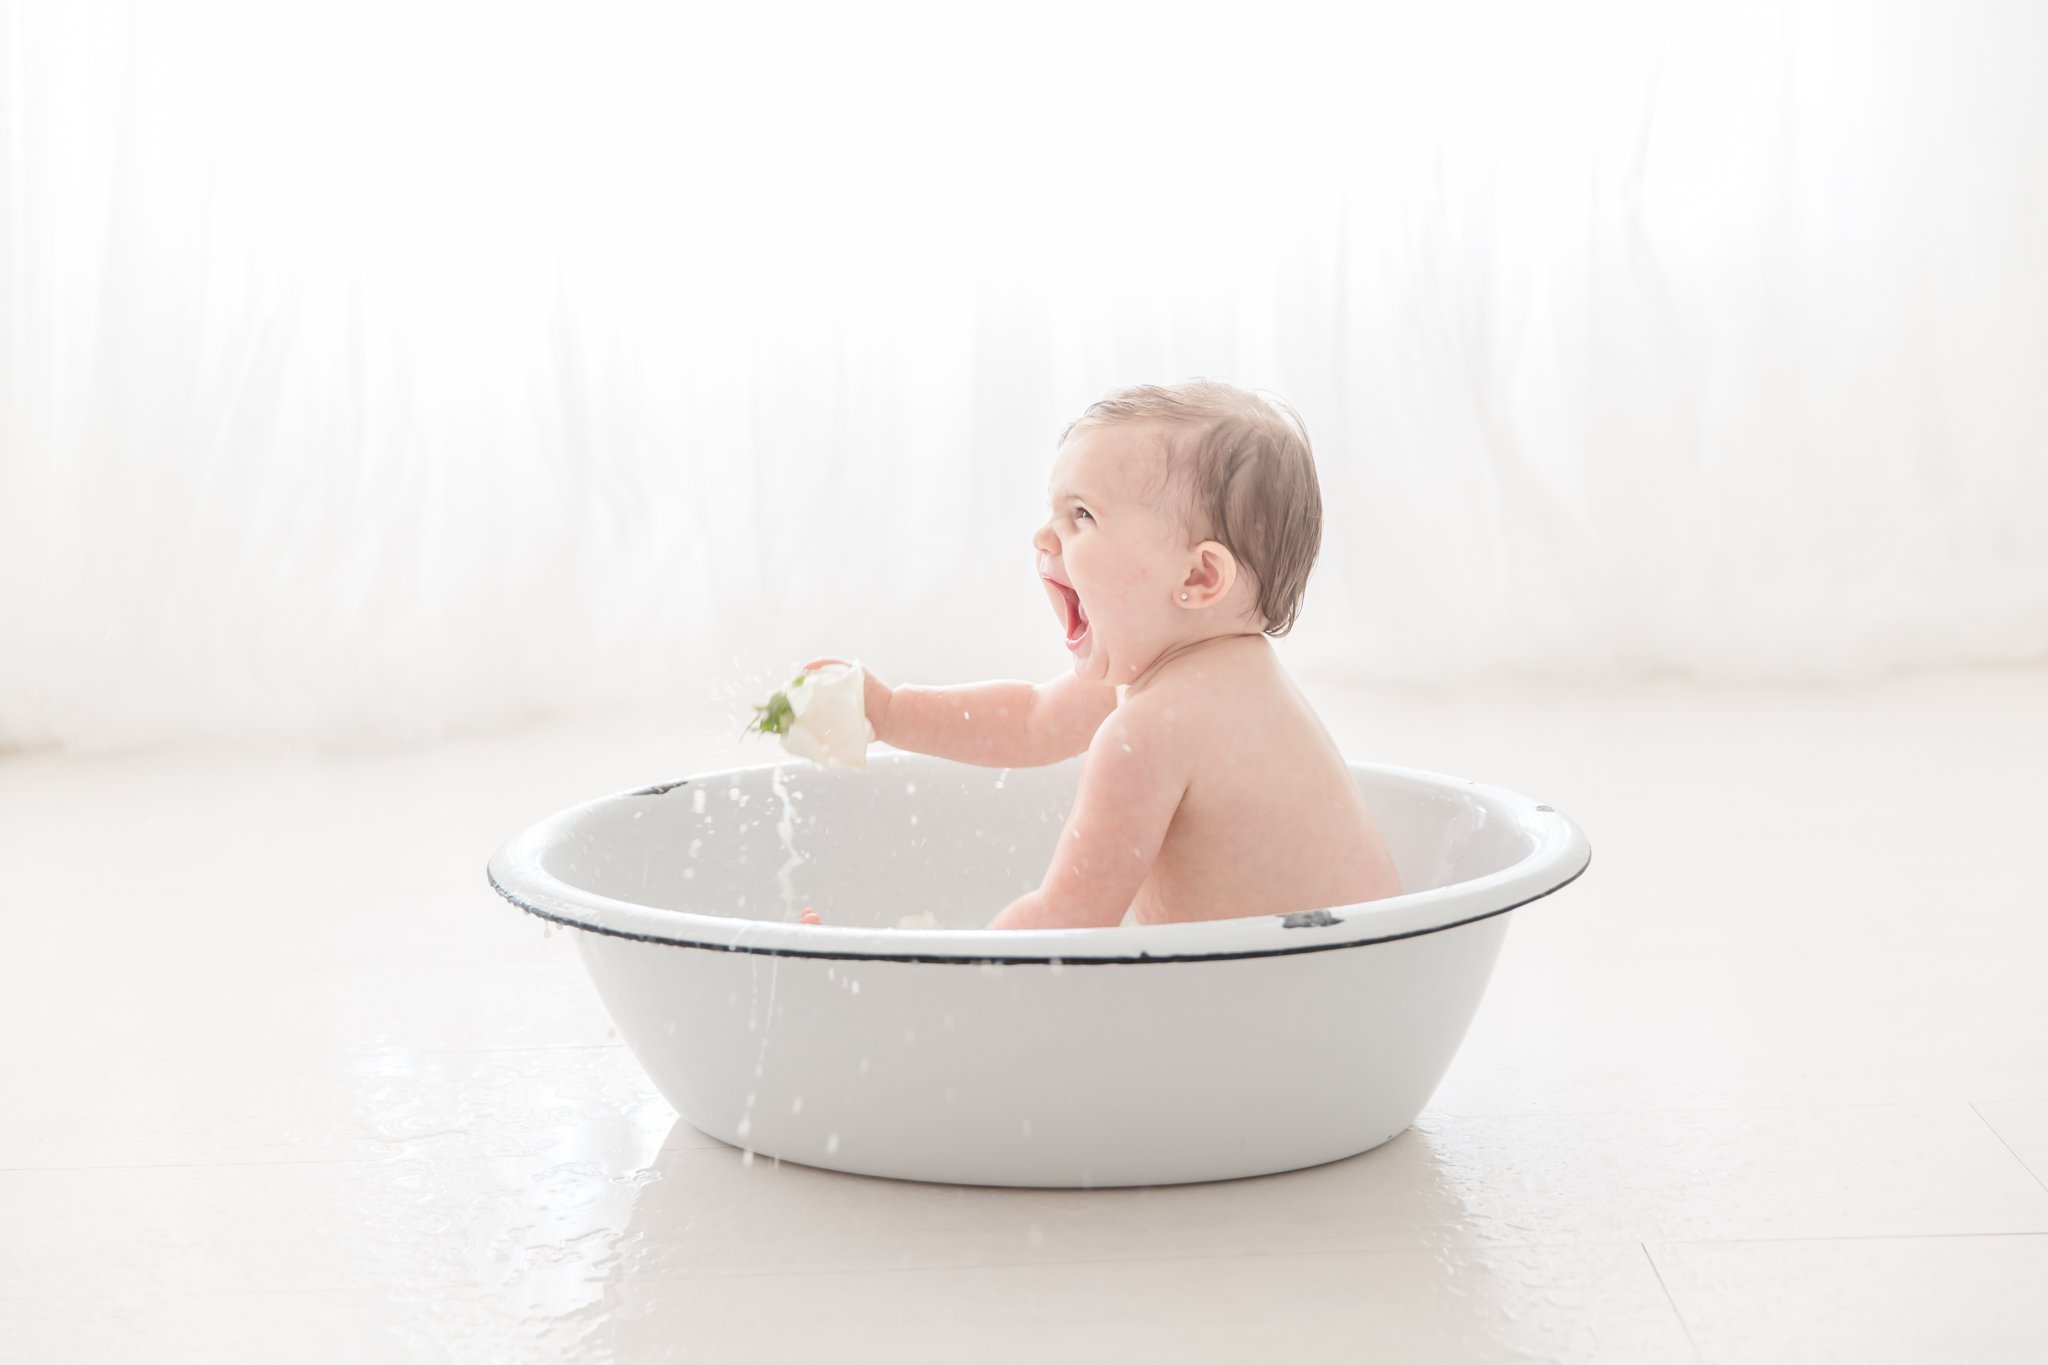 Baby playing in an antique wash basin in jupiter florida photo studio.  